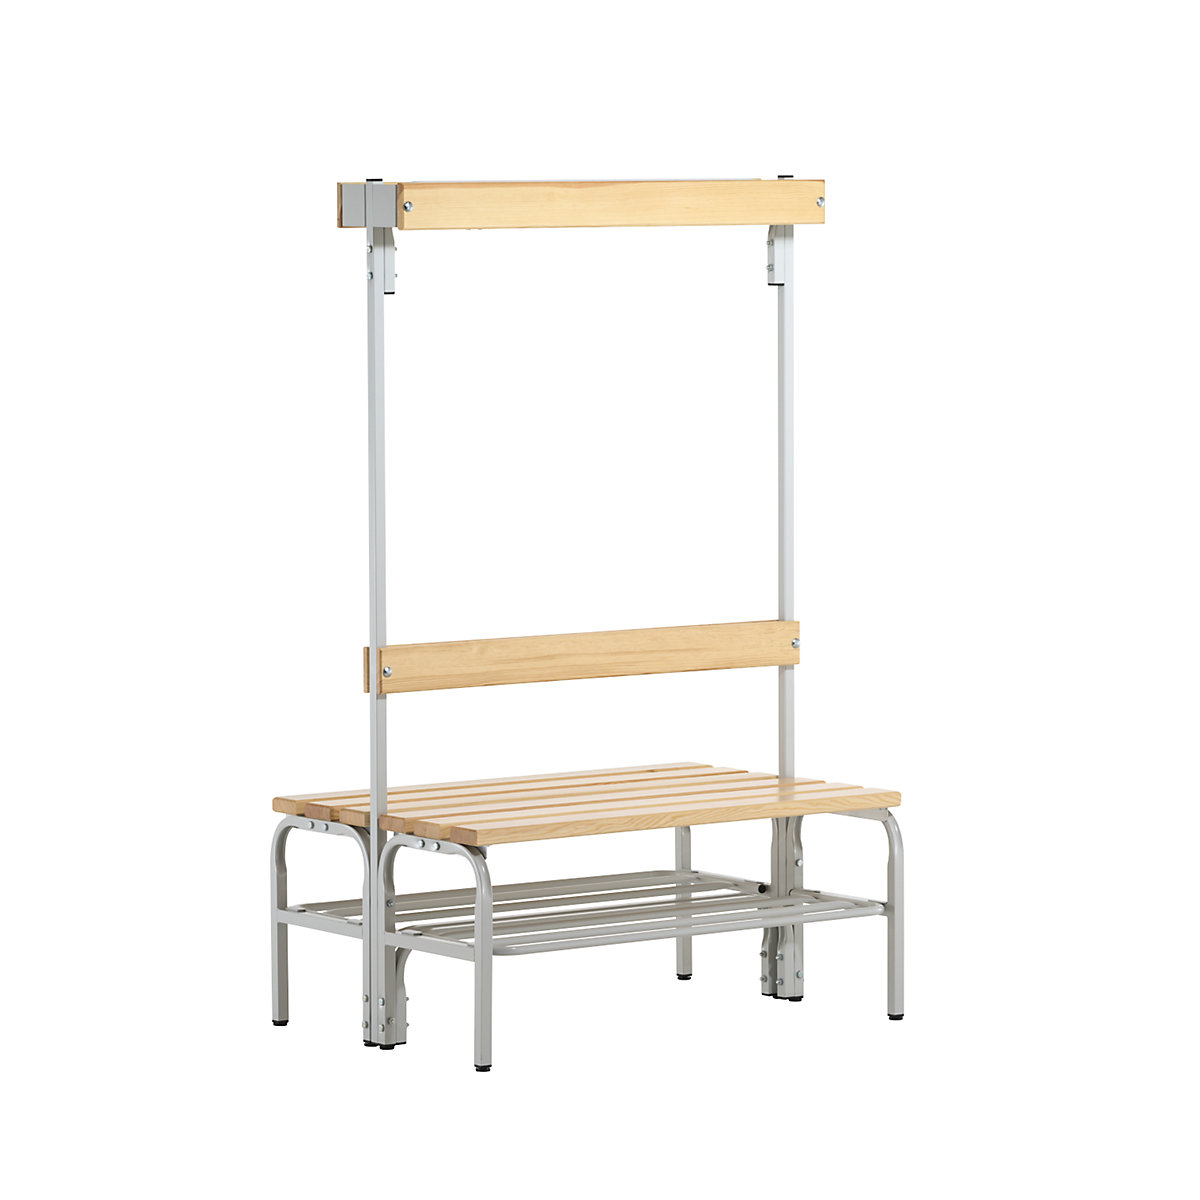 Sypro – Cloakroom bench with hook strips, double-sided, 6 hooks, 1015 mm, light grey, shoe rack